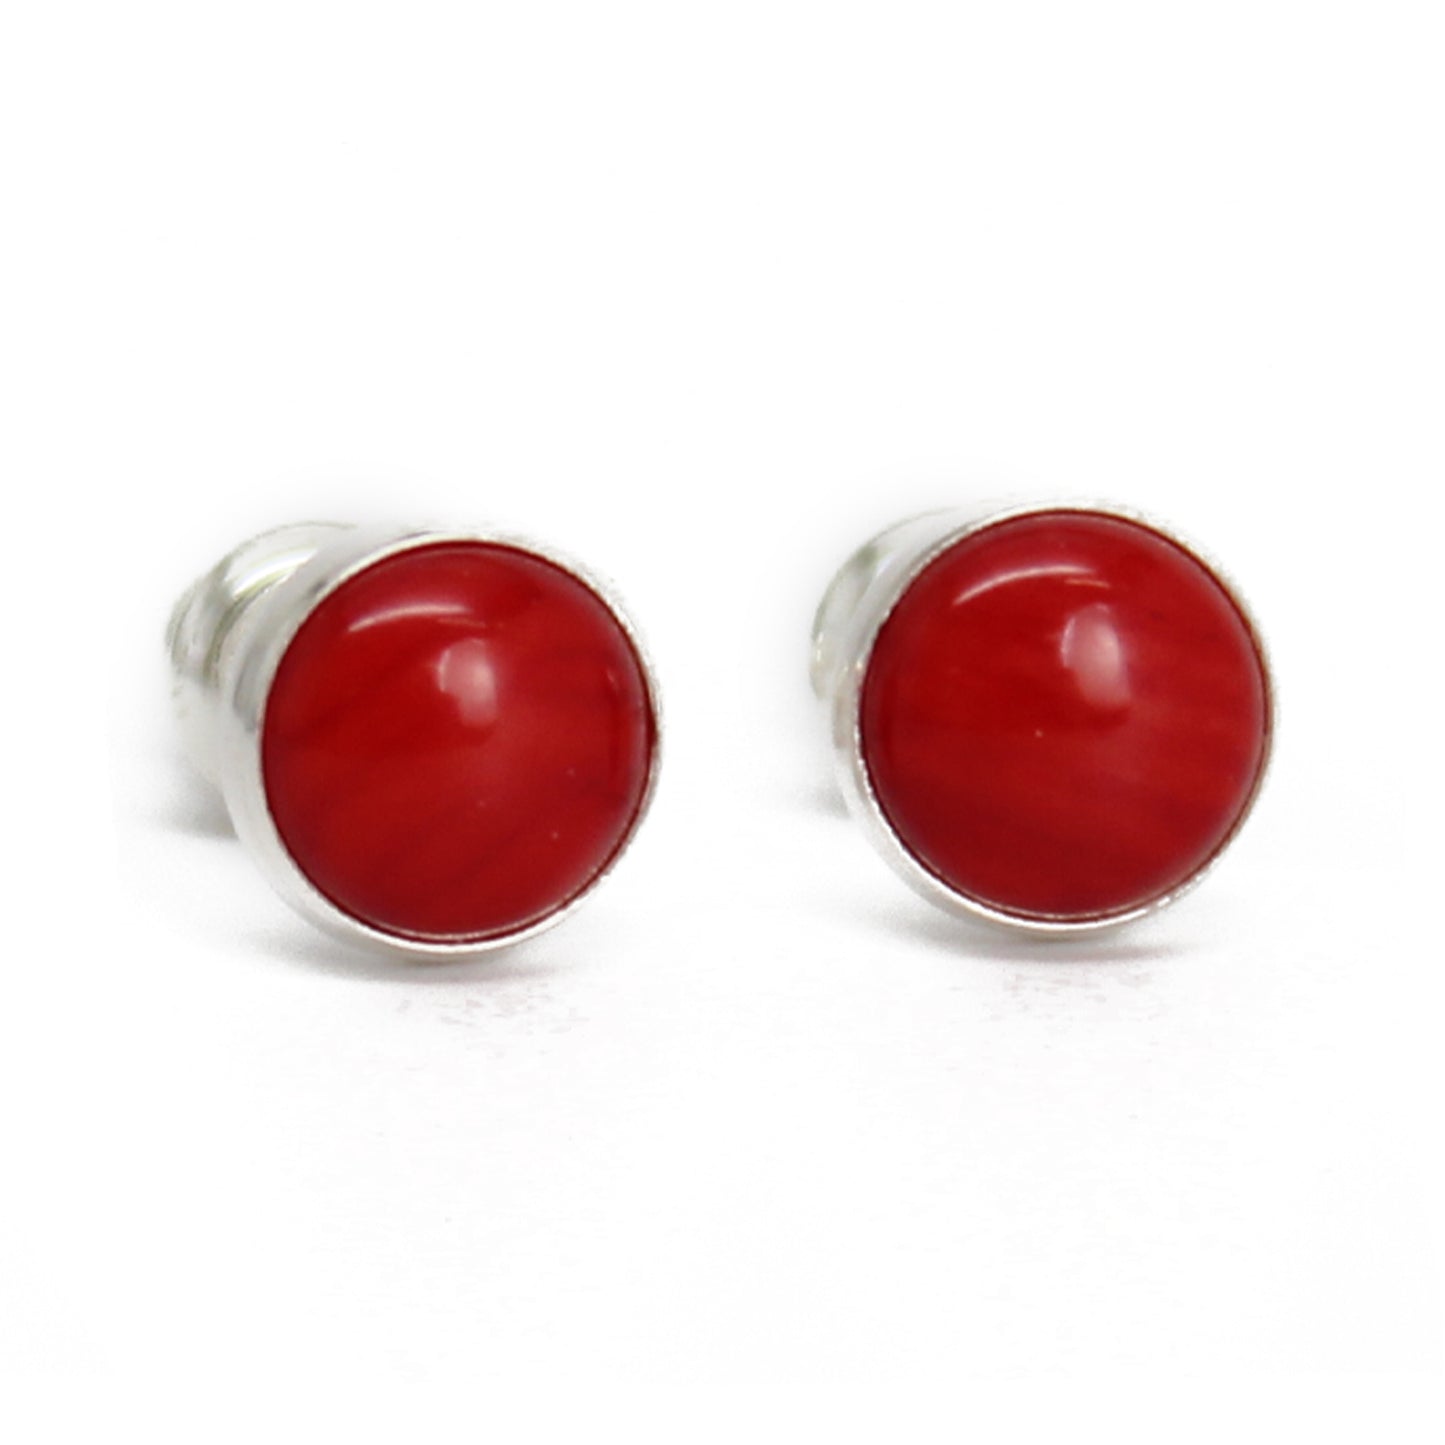 Red Coral Stud Earrings, Small 6mm